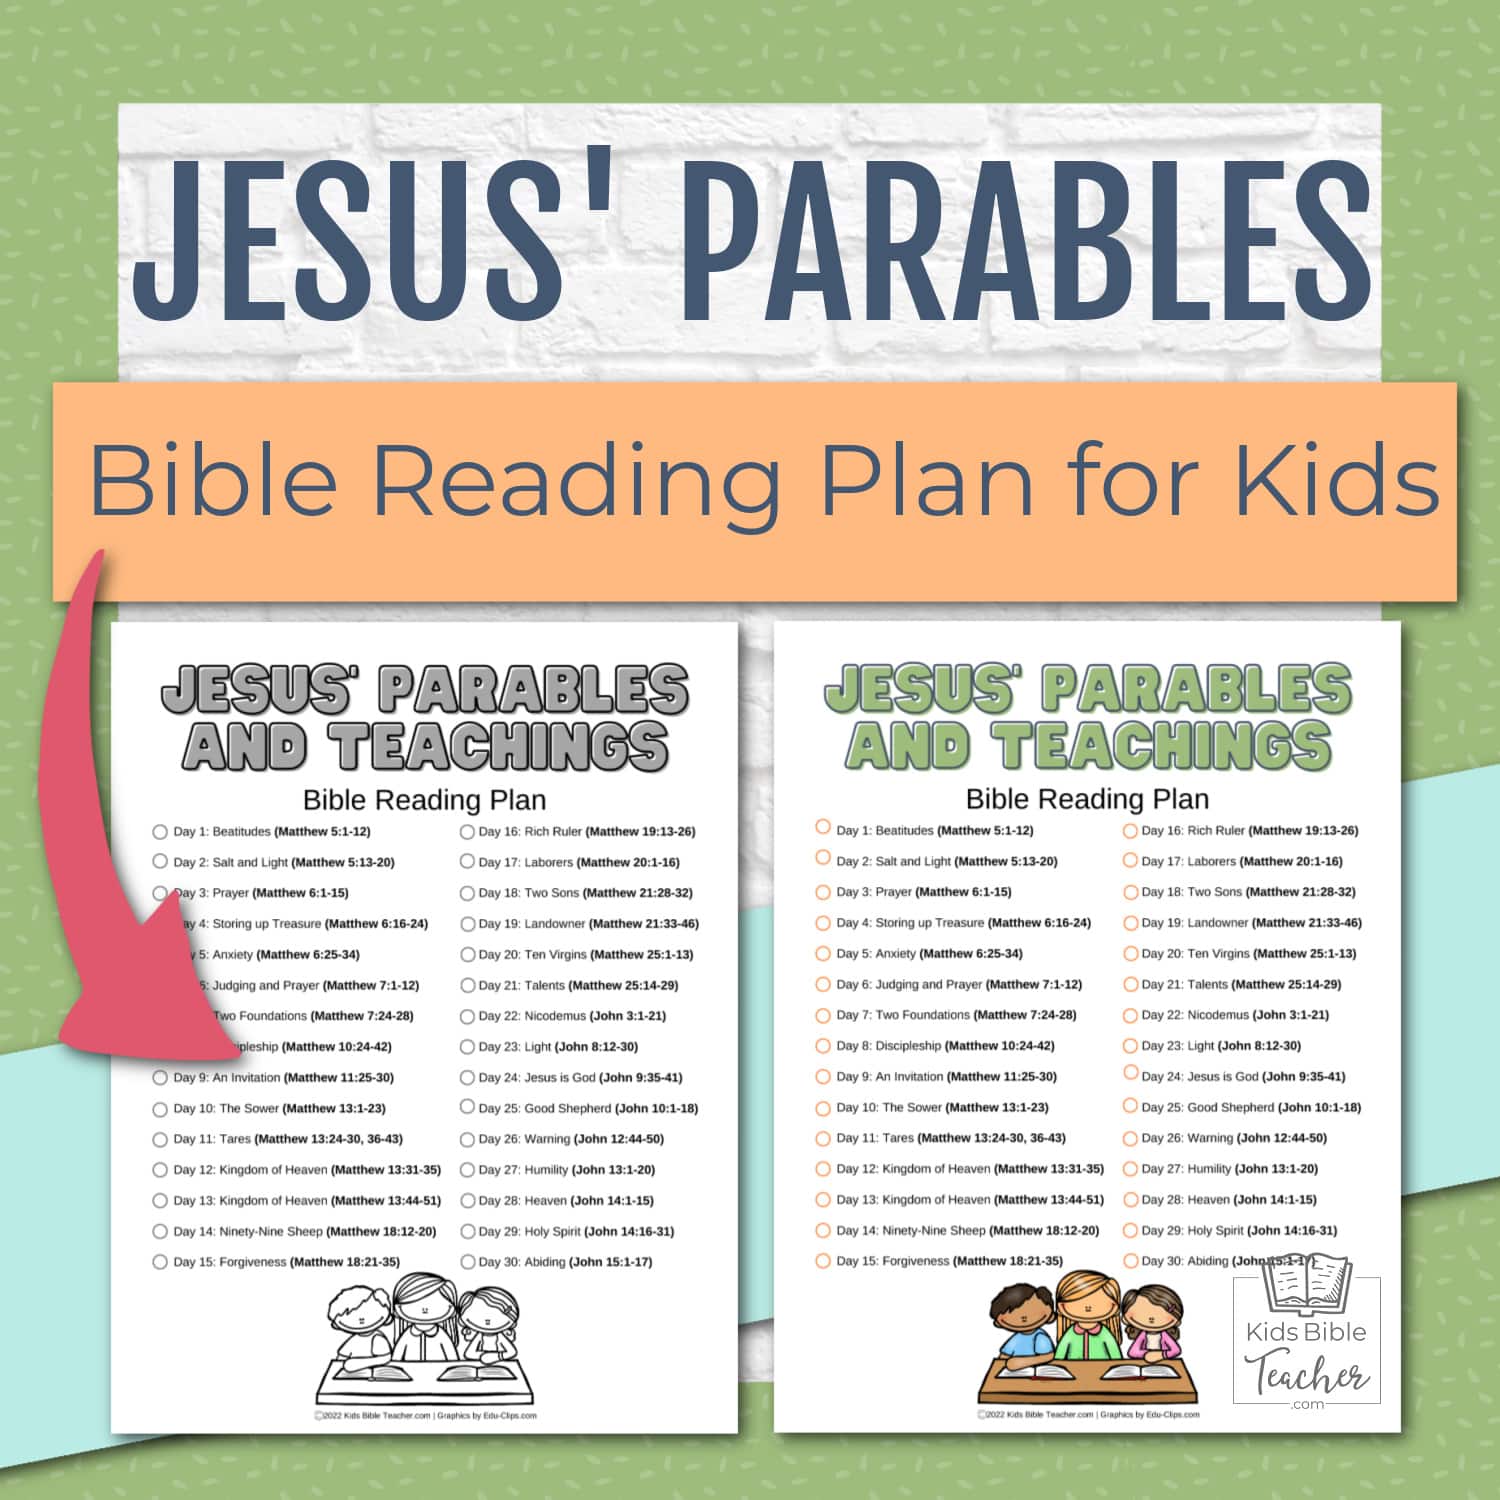 Jesus' parables Bible reading plan for Kids image showing page in full color and black and white